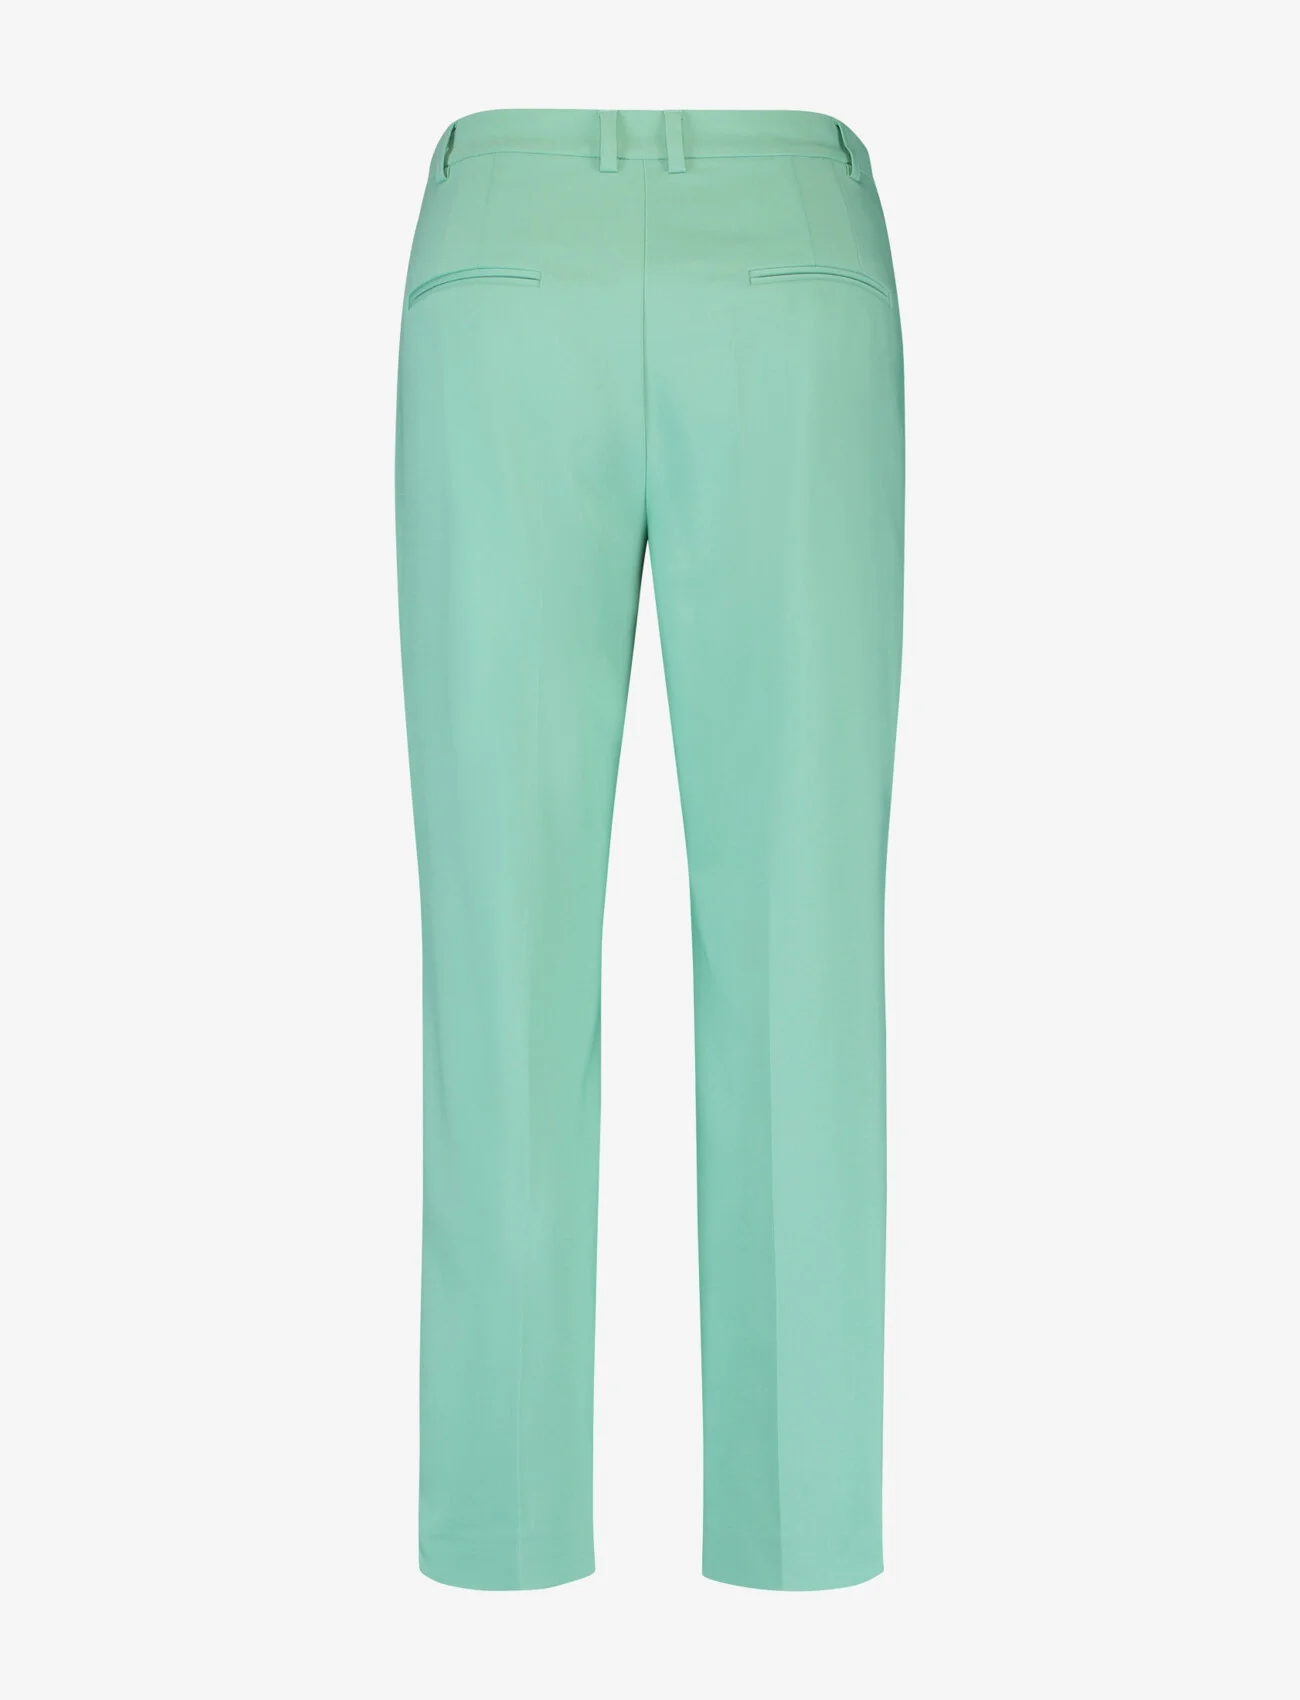 Gerry Weber - PANT LEISURE CROPPED - chinot - dusty jade green - 1